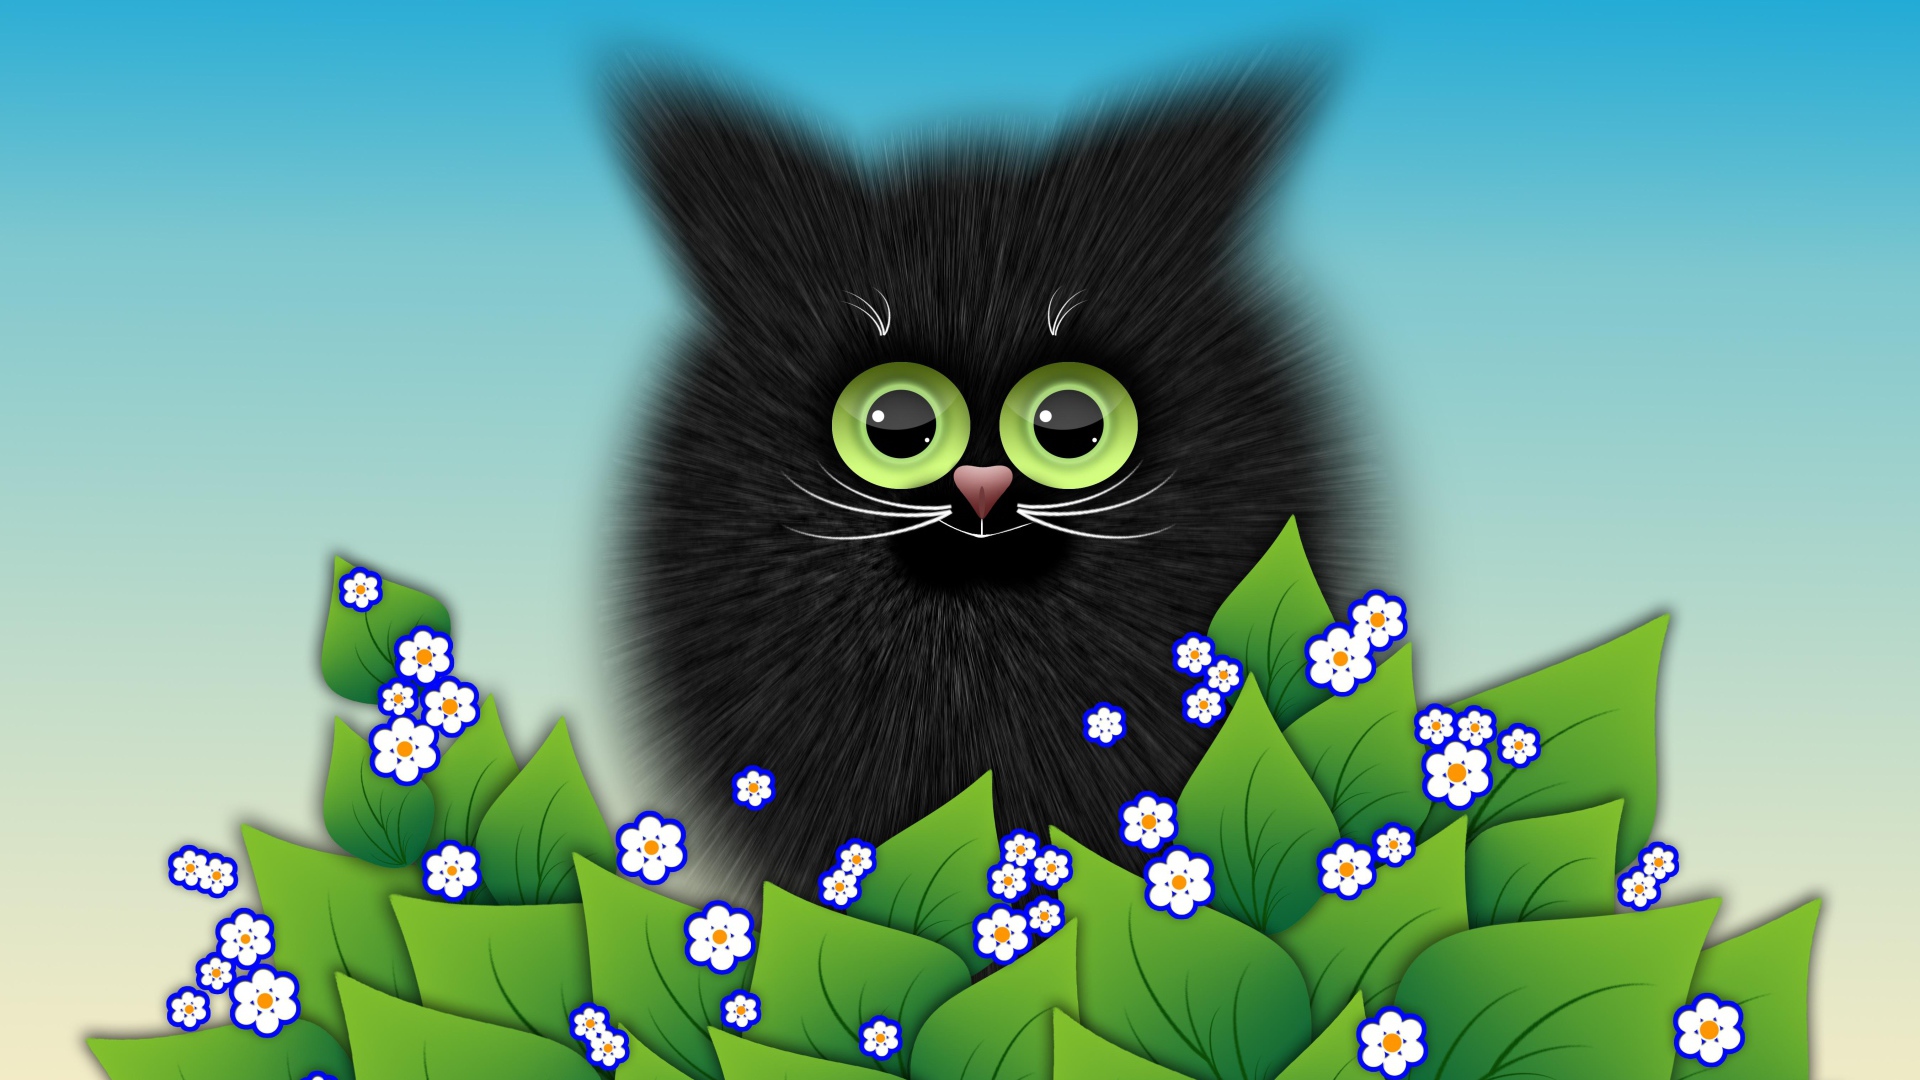 Black kitten with green leaves vector drawing